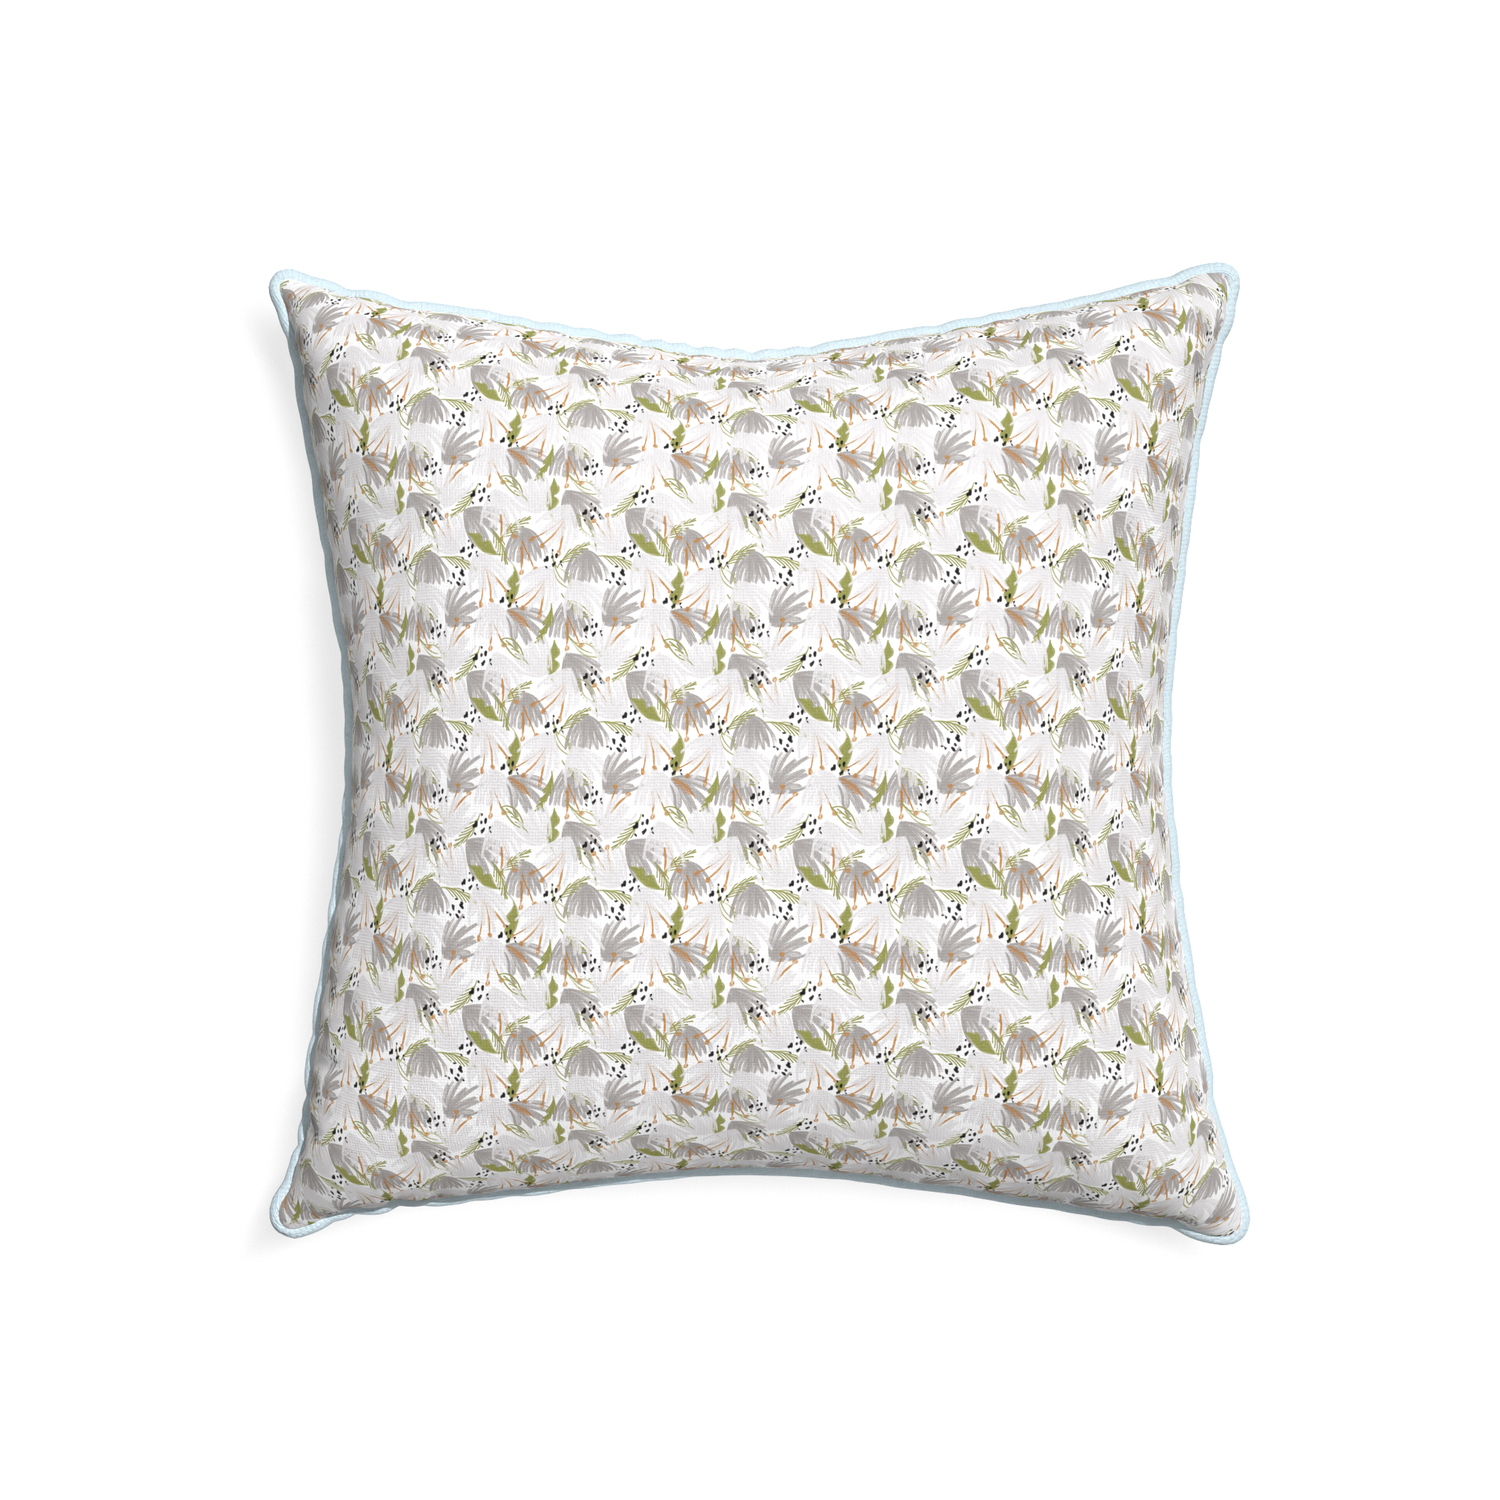 22-square eden grey custom grey floralpillow with powder piping on white background